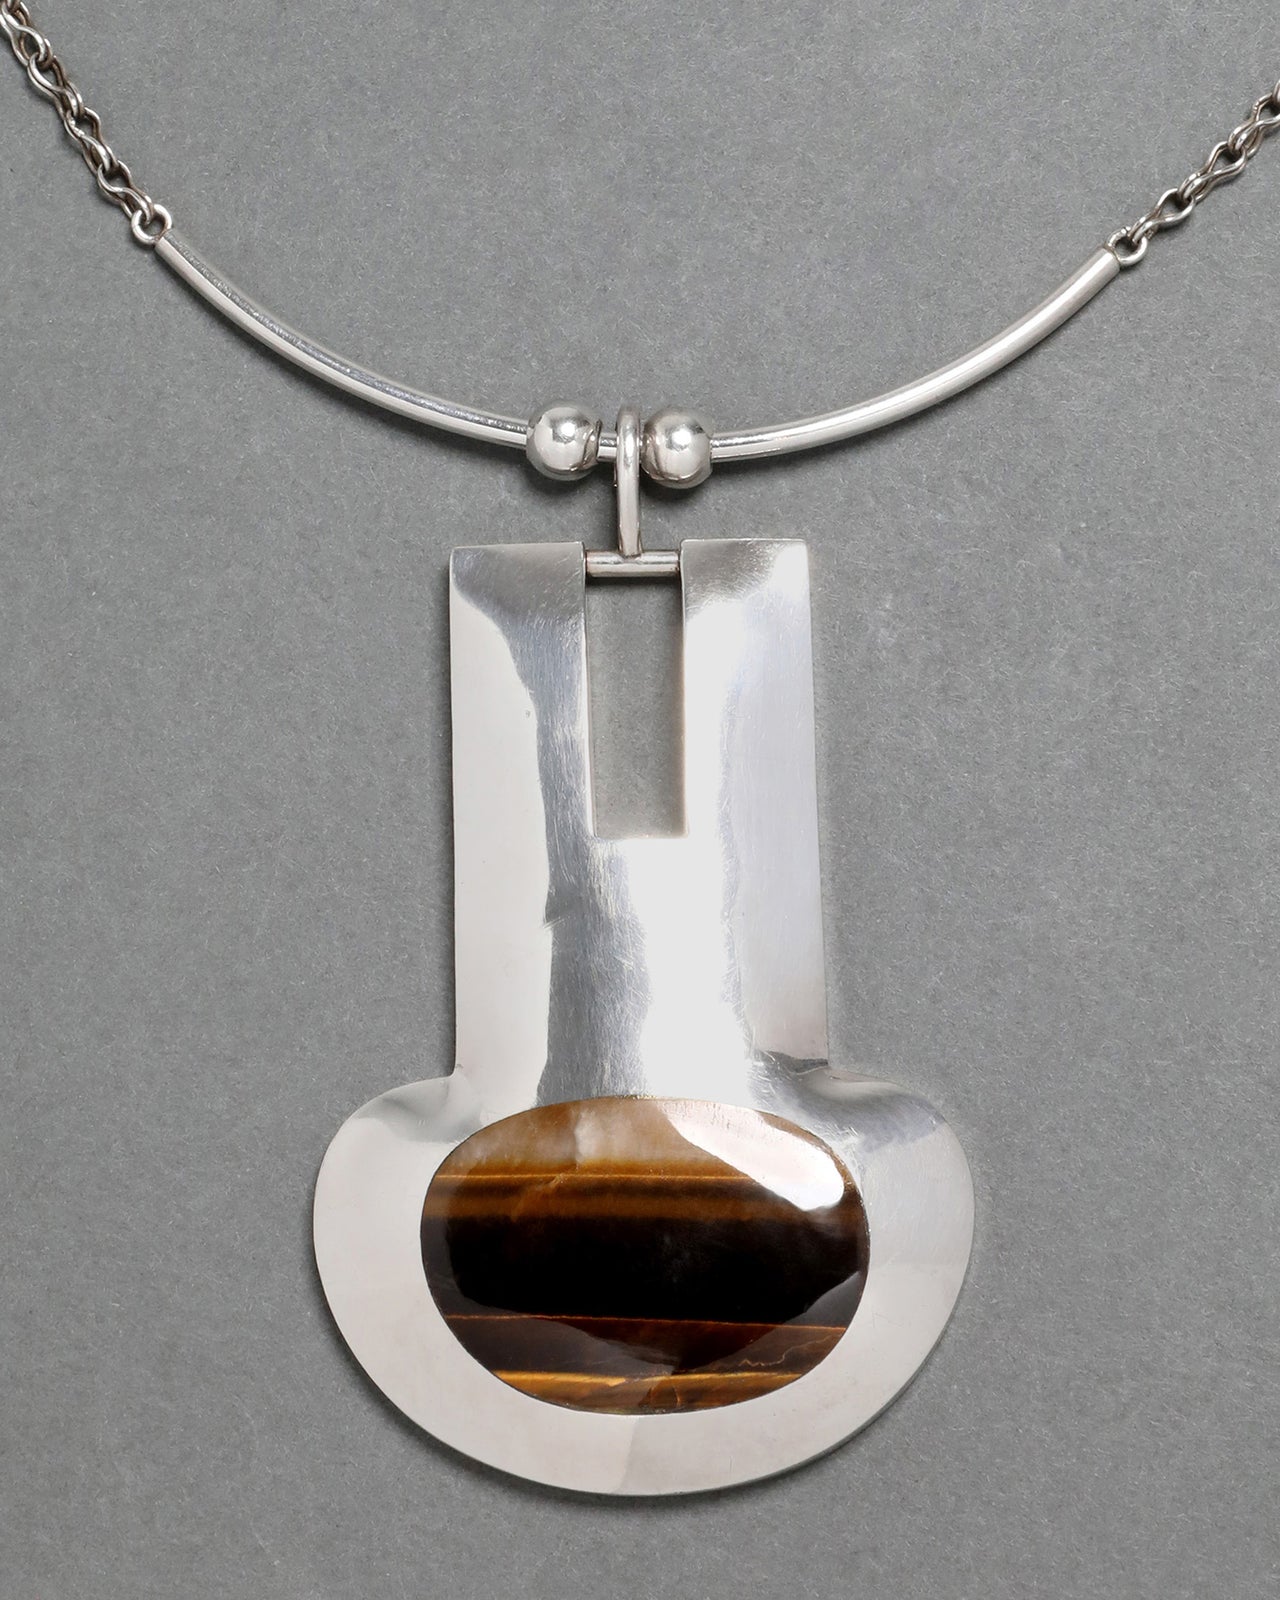 Vintage 1970s Sterling Silver Tigers Eye Pendant Necklace - Photo 2